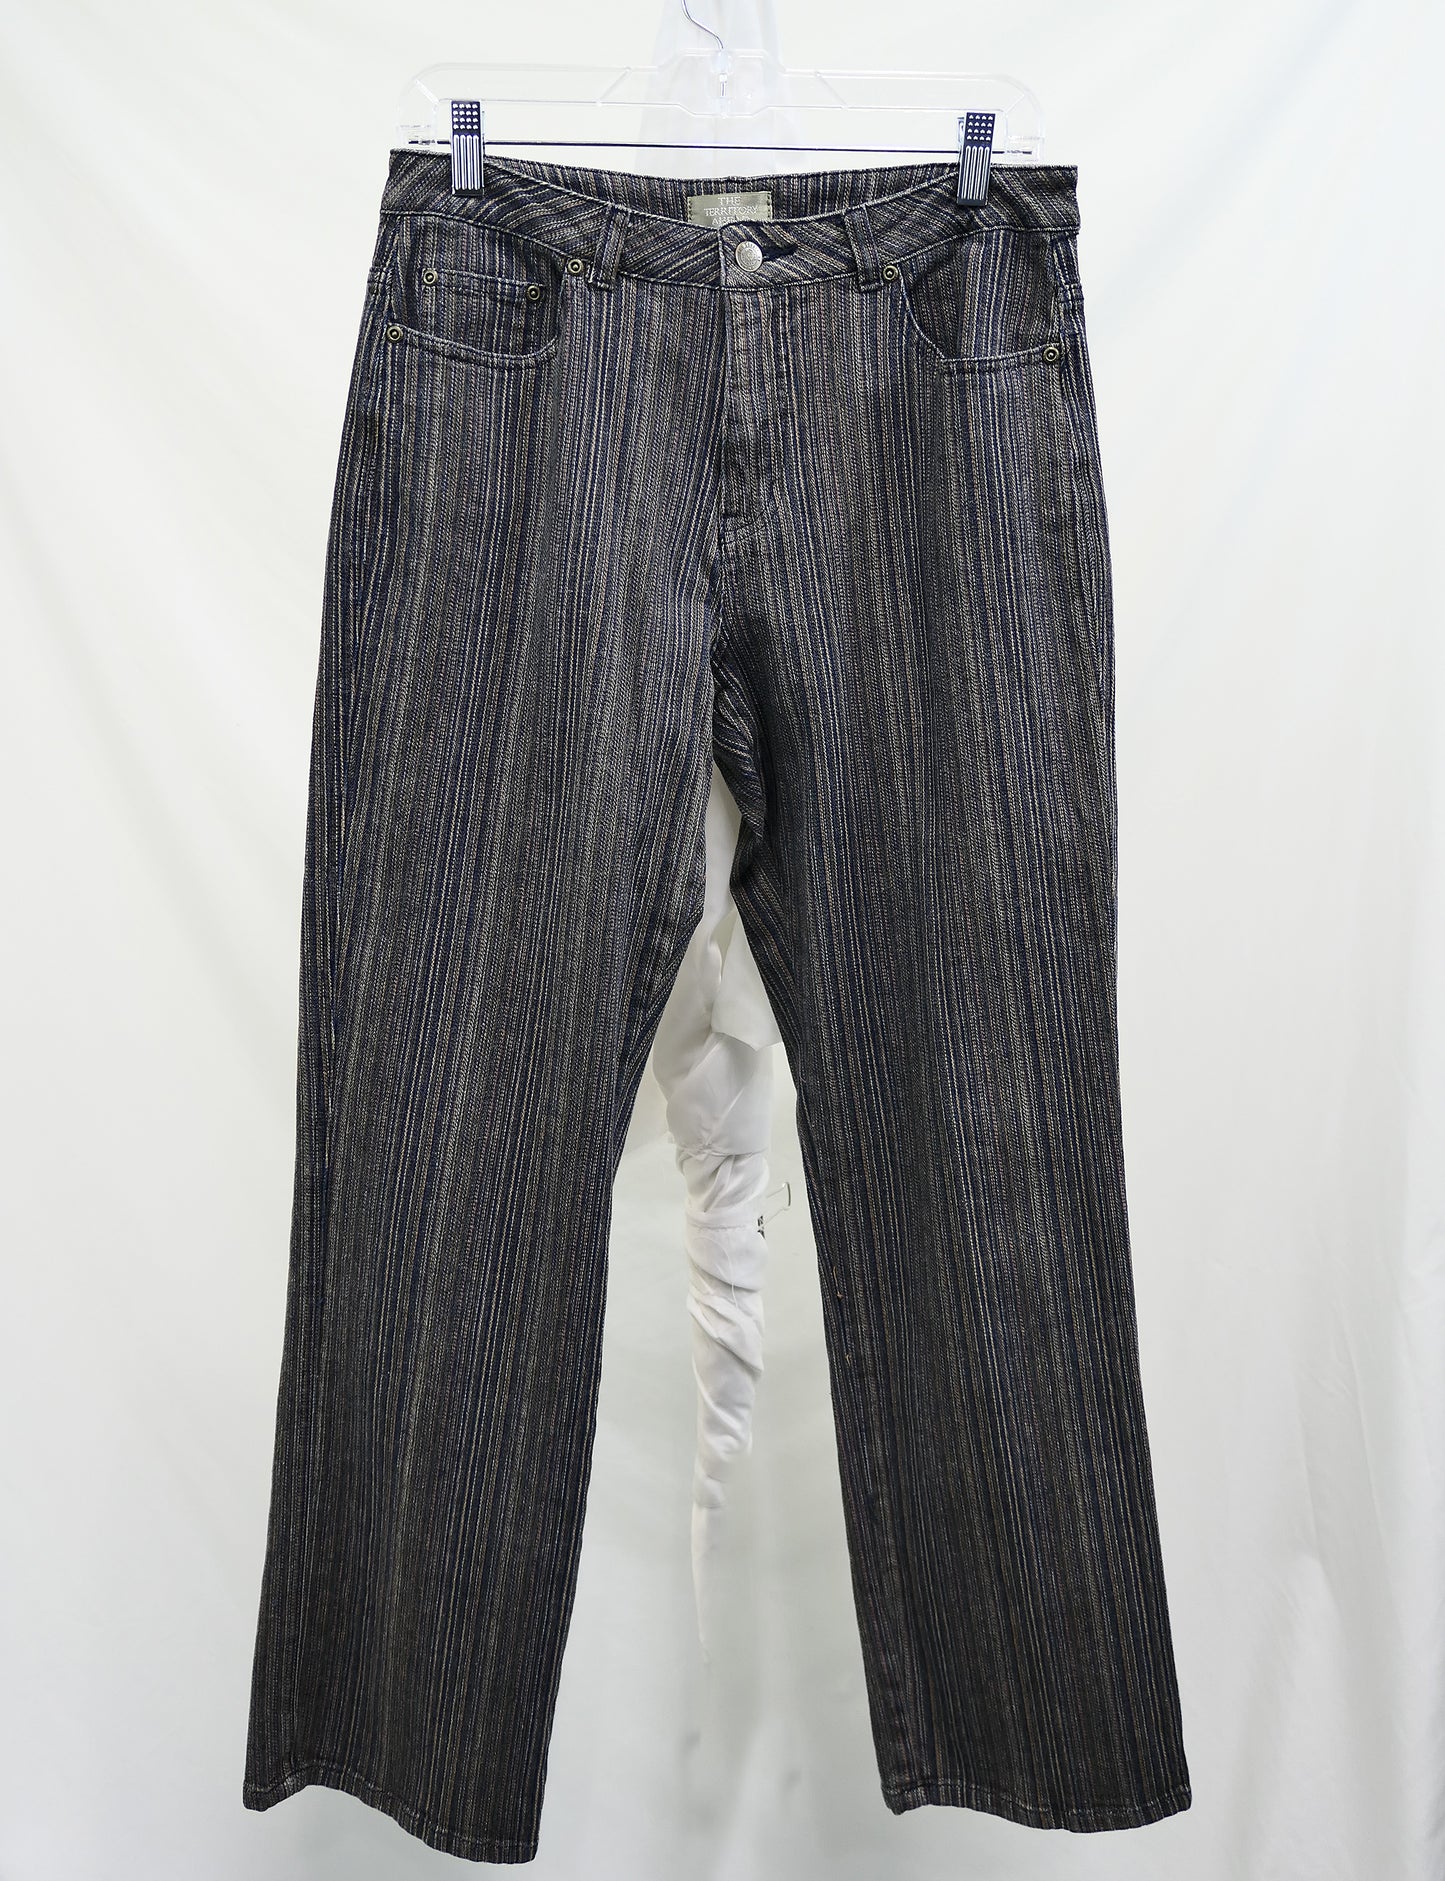 The Territory Ahead Vertical Thin Striped Jeans - Size 8